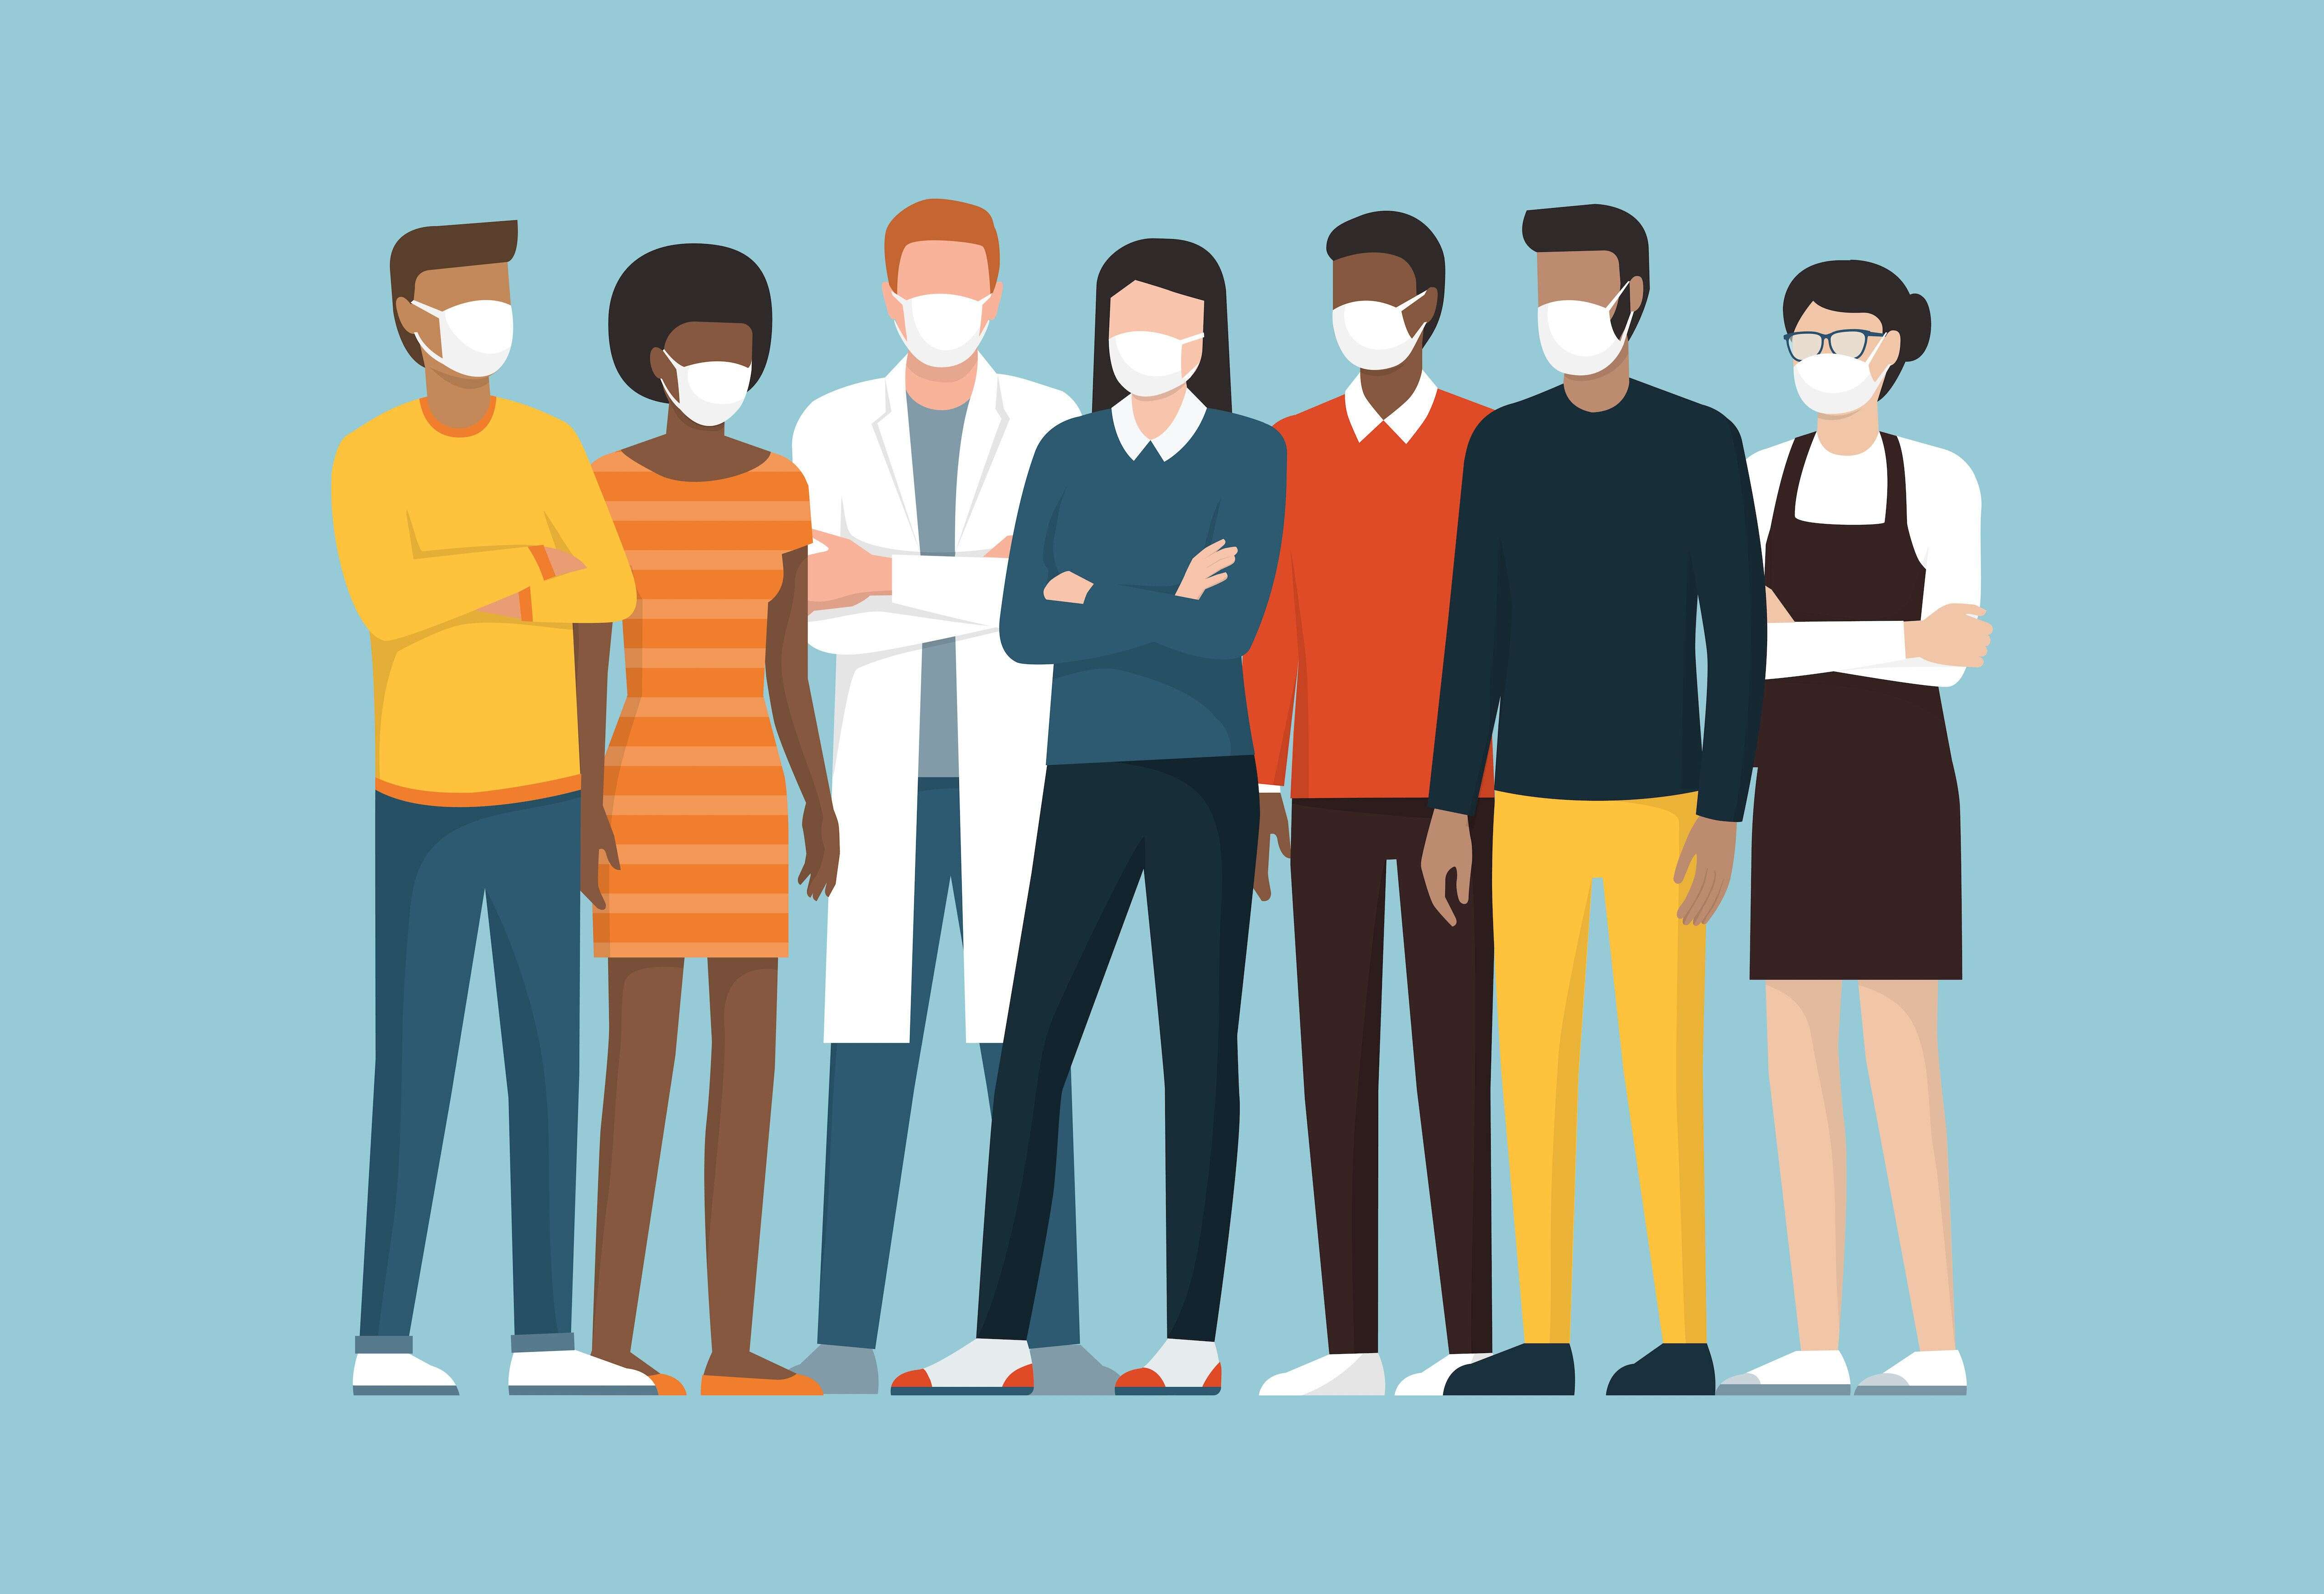 Group of people wearing surgical masks and standing together, coronavirus covid-20119 prevention and safety procedures concept